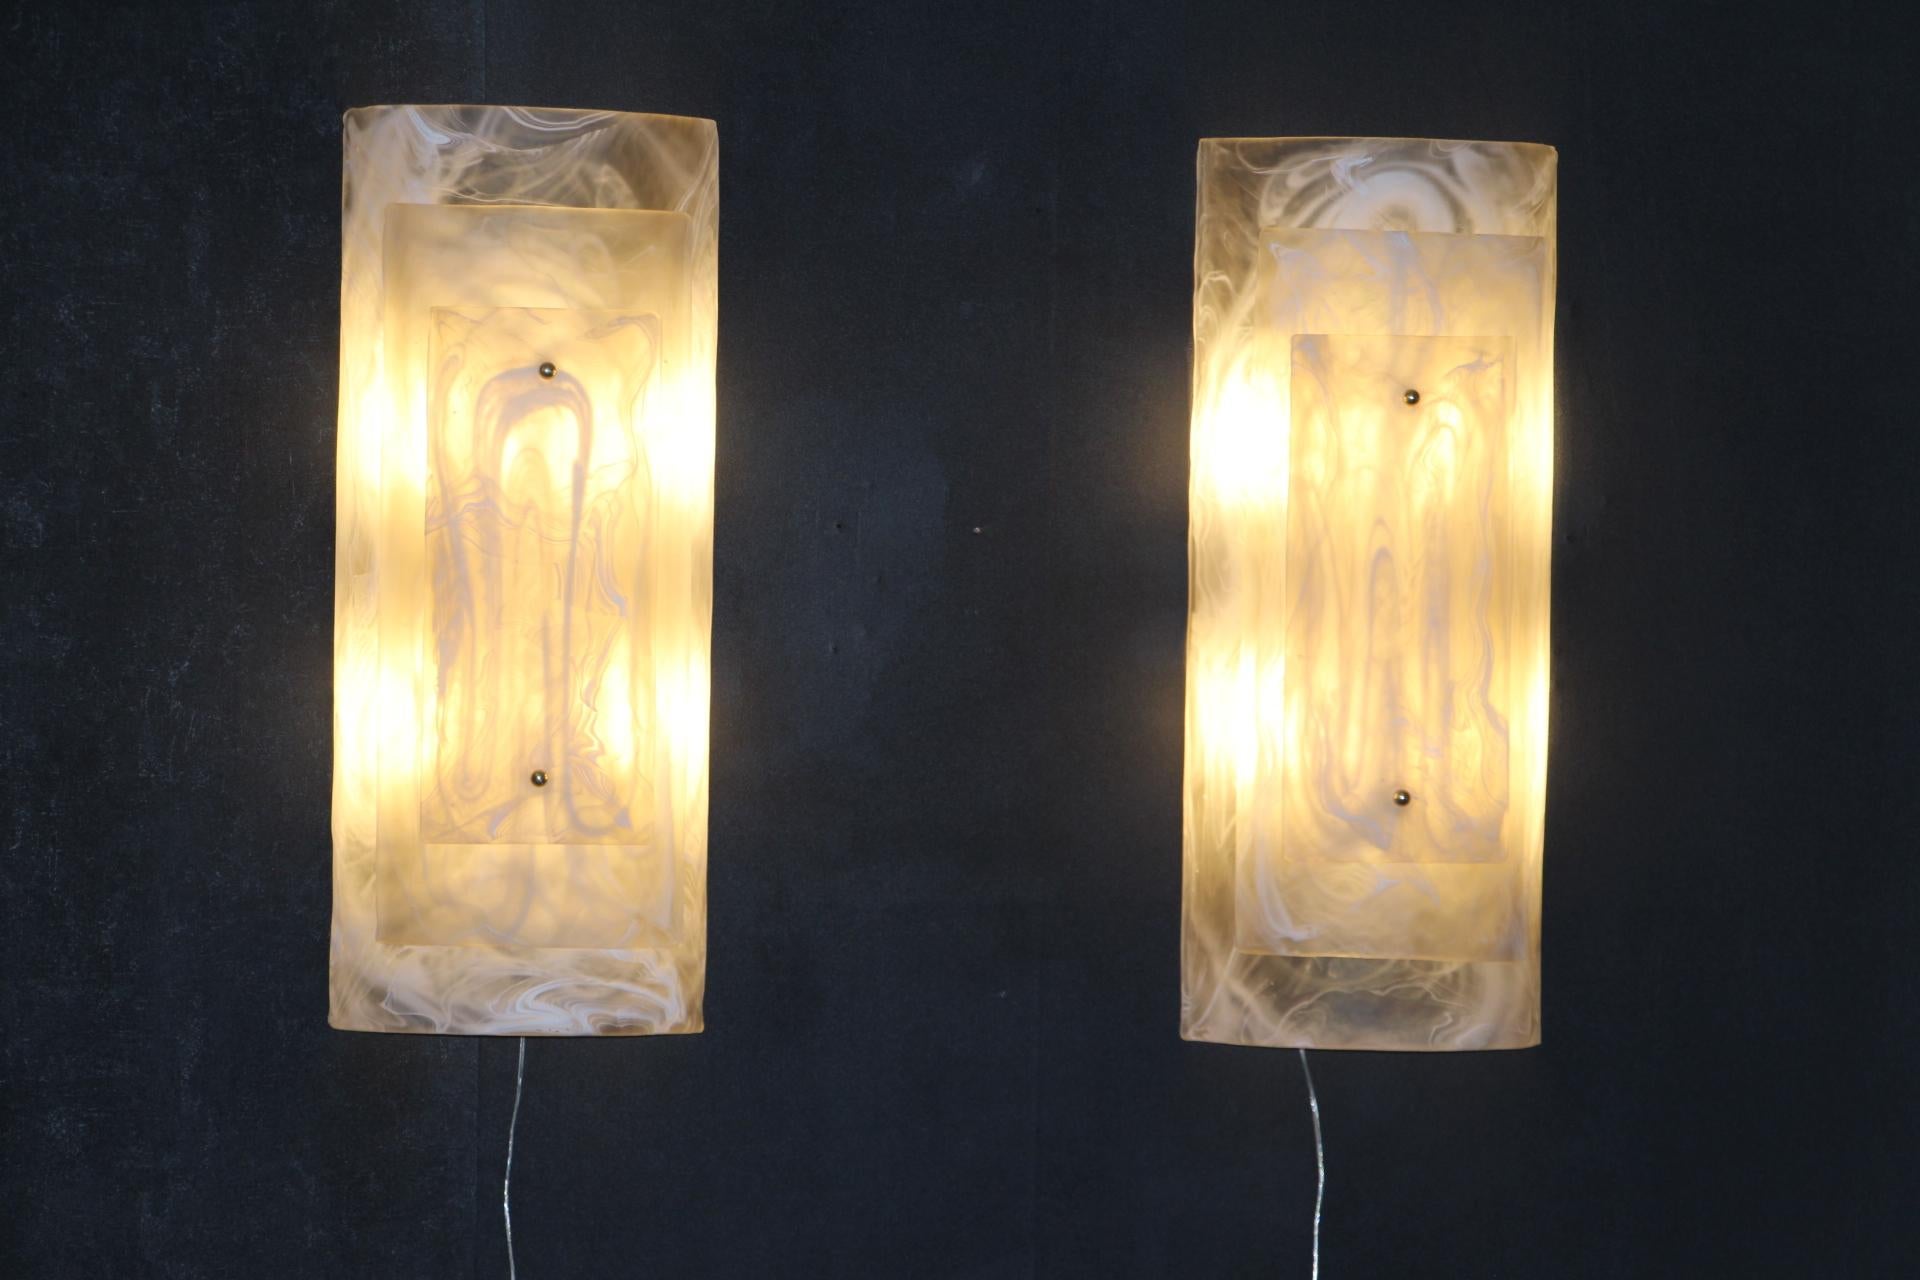 This impressive pair of murano glass sconces is really unusual.
They are made of 3 layers of bent glass, one fixed on the other thanks to 2 brass studs. 
Pieces of glass are an art work, looking like alabaster or marble design.
They are in the style